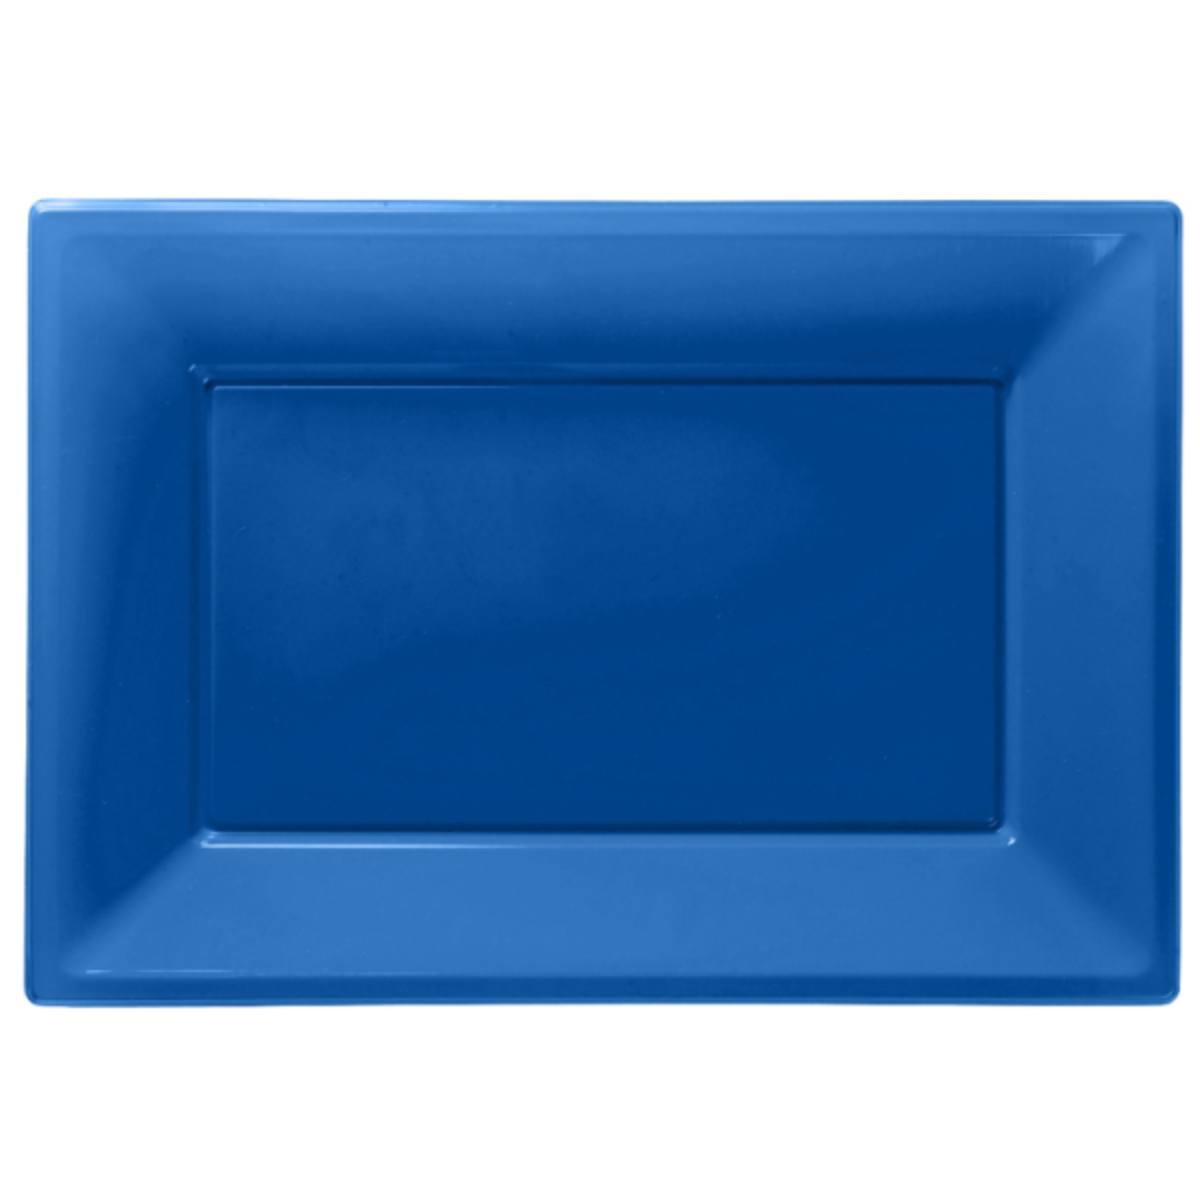 Pk3 Bright Blue Plastic Serving Platters by Amscan 997428 available here at Karnival Costumes online party shop